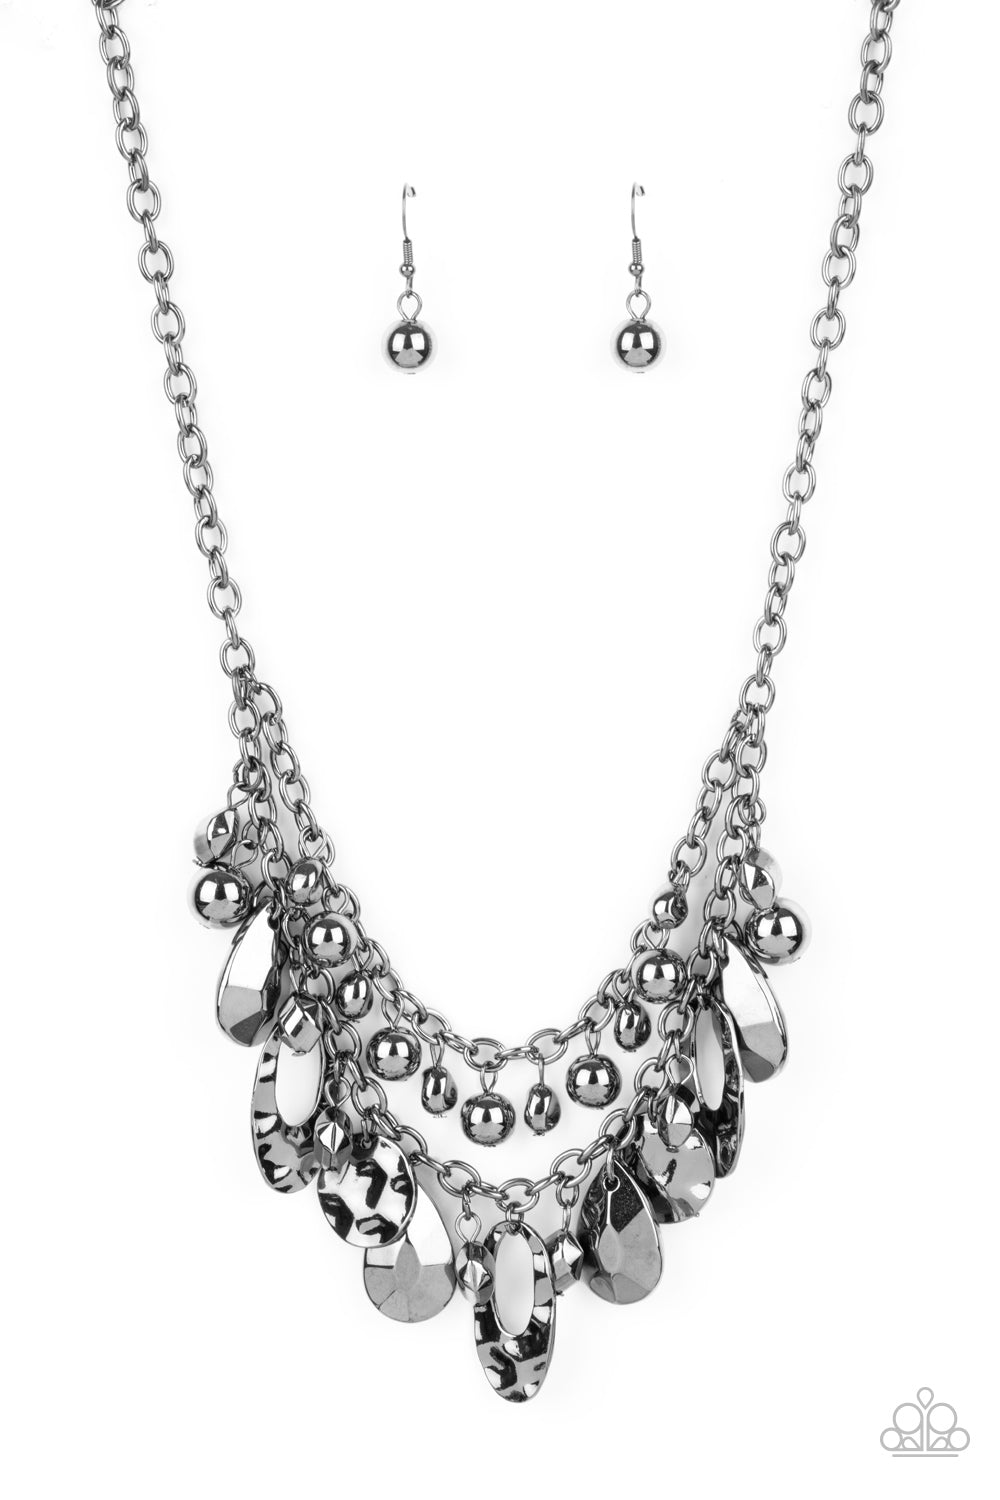 Infused with a row of classic gunmetal beads, an oversized collection of hammered gunmetal teardrops, discs, and faceted beads swing from a classic gunmetal chain, creating a rambunctious fringe below the collar